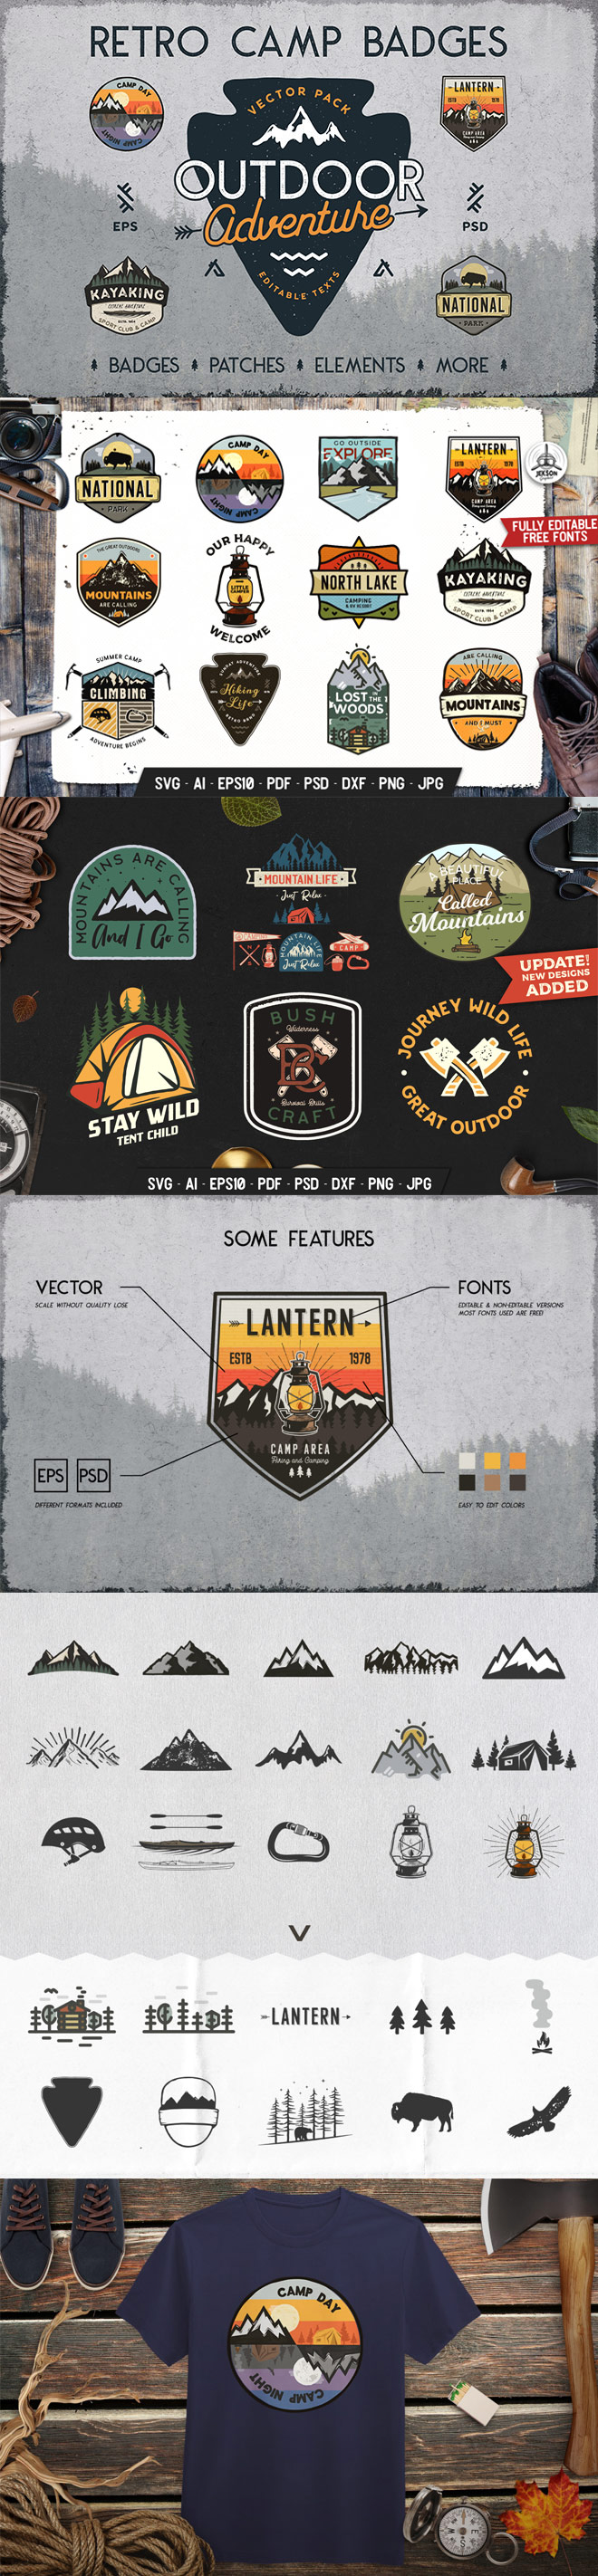 Retro Camping Badges & Outdoor Patches for Premium Members